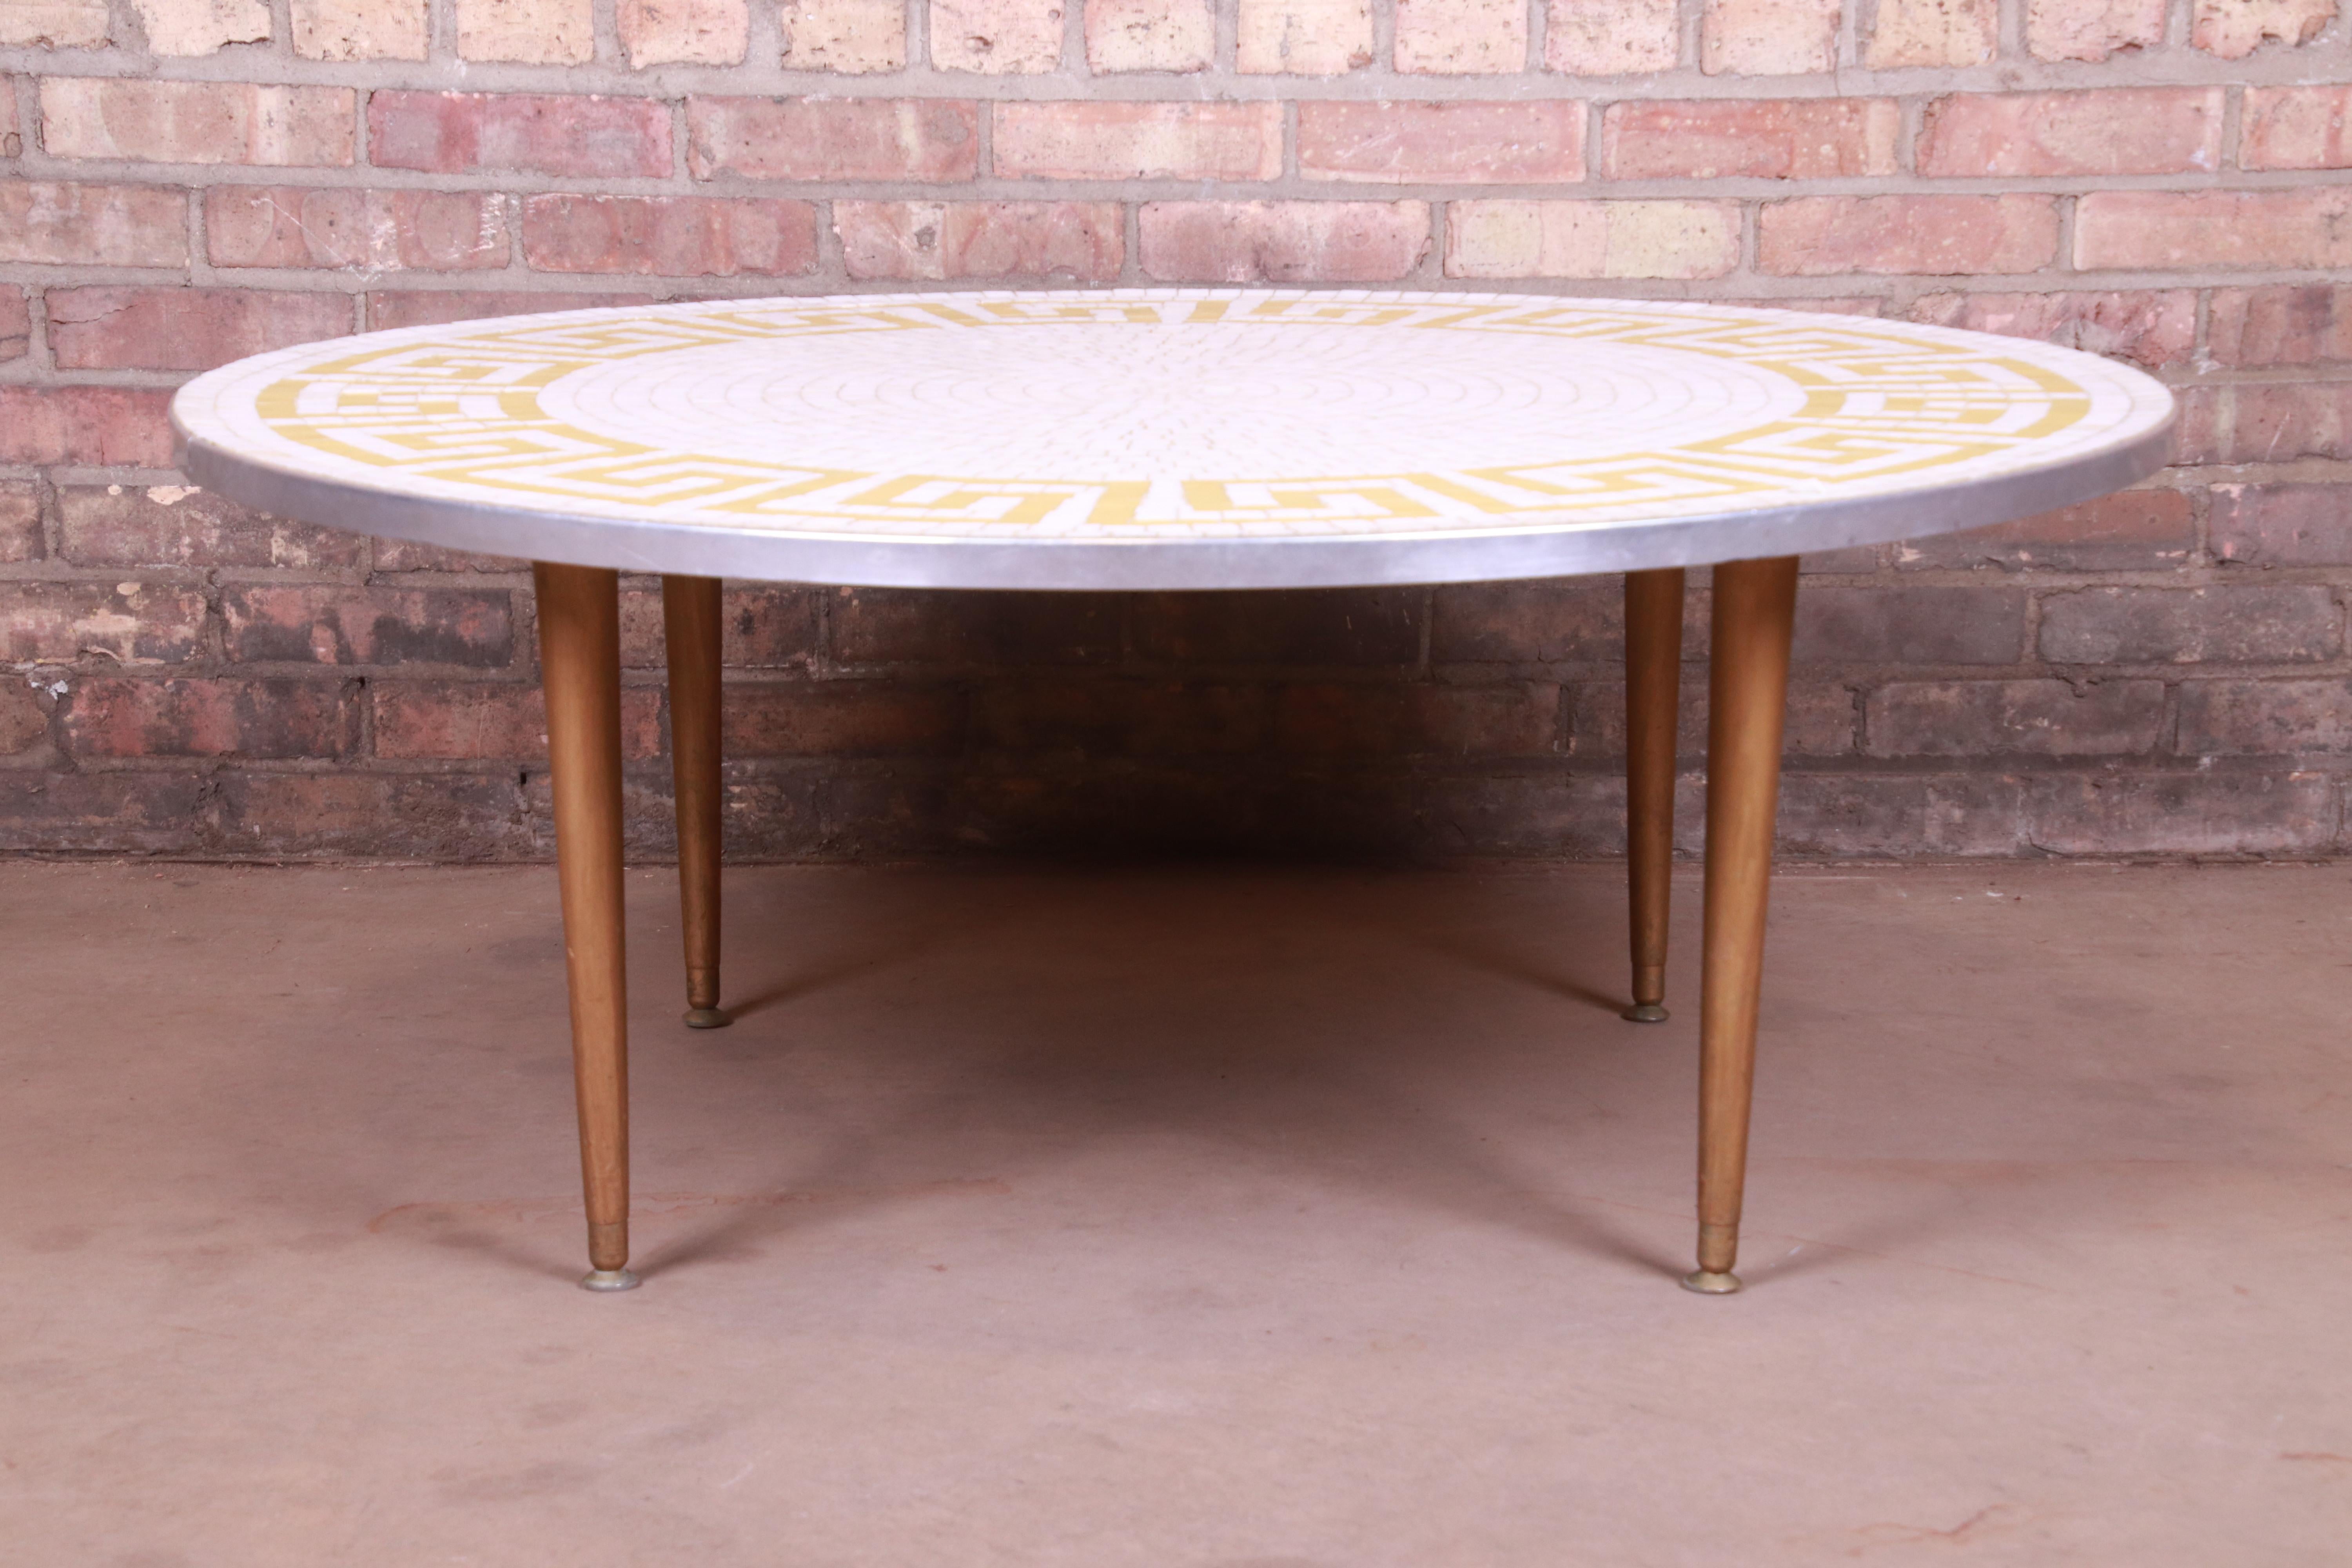 An exceptional Mid-Century Modern Greek Key mosaic tile coffee or cocktail table with removable Lazy Susan

Italy, circa 1950s

Measures: 42.25